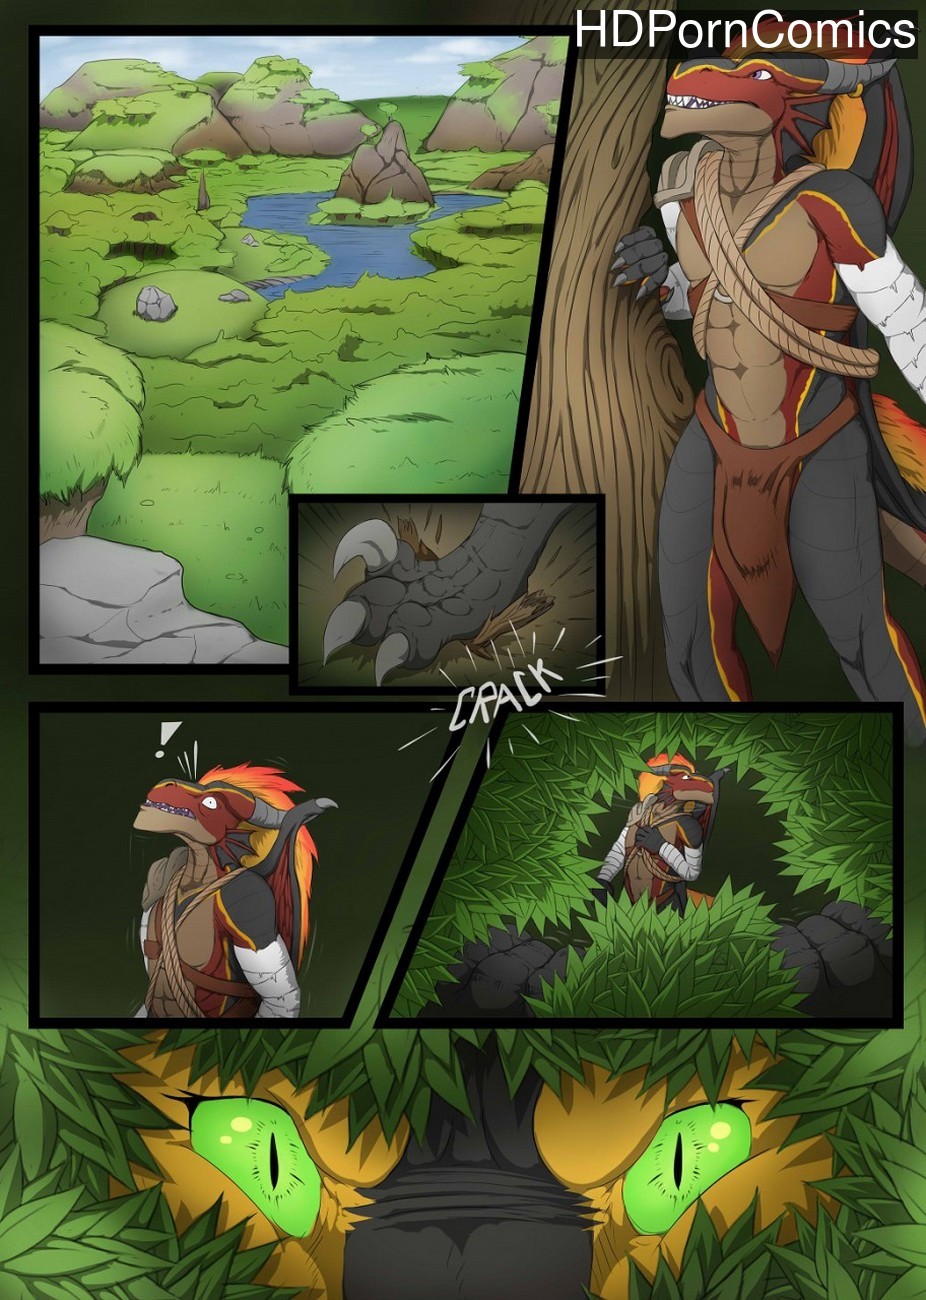 Forest Monster Porn Furry - Trapped In The Woods comic porn â€“ HD Porn Comics